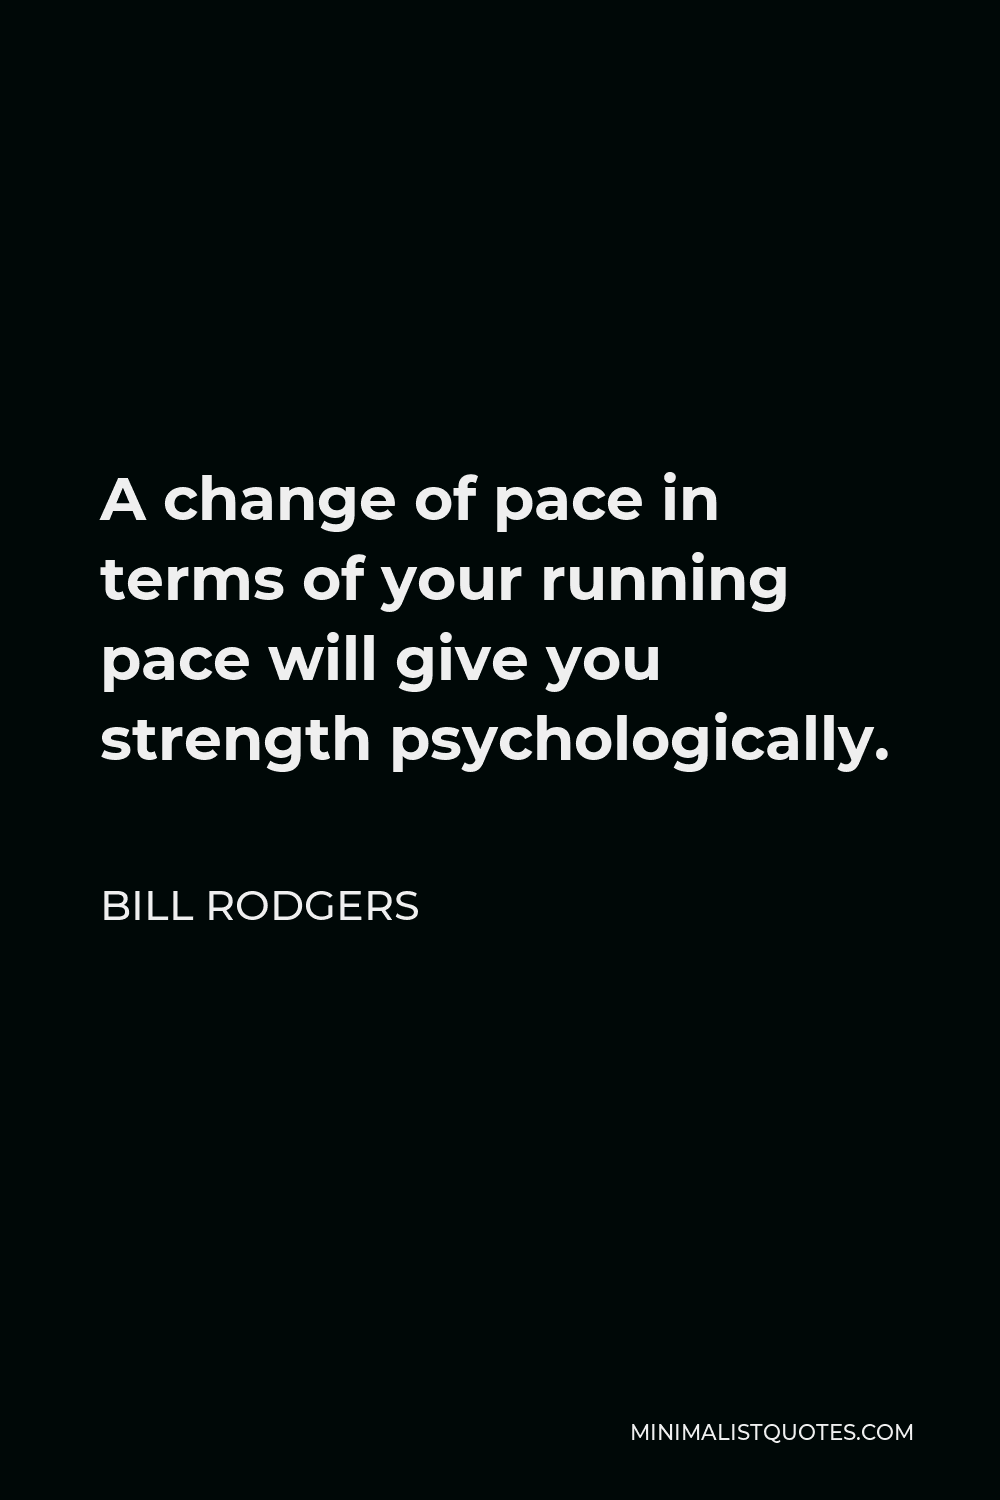 Bill Rodgers Quote - A change of pace in terms of your running pace will give you strength psychologically.